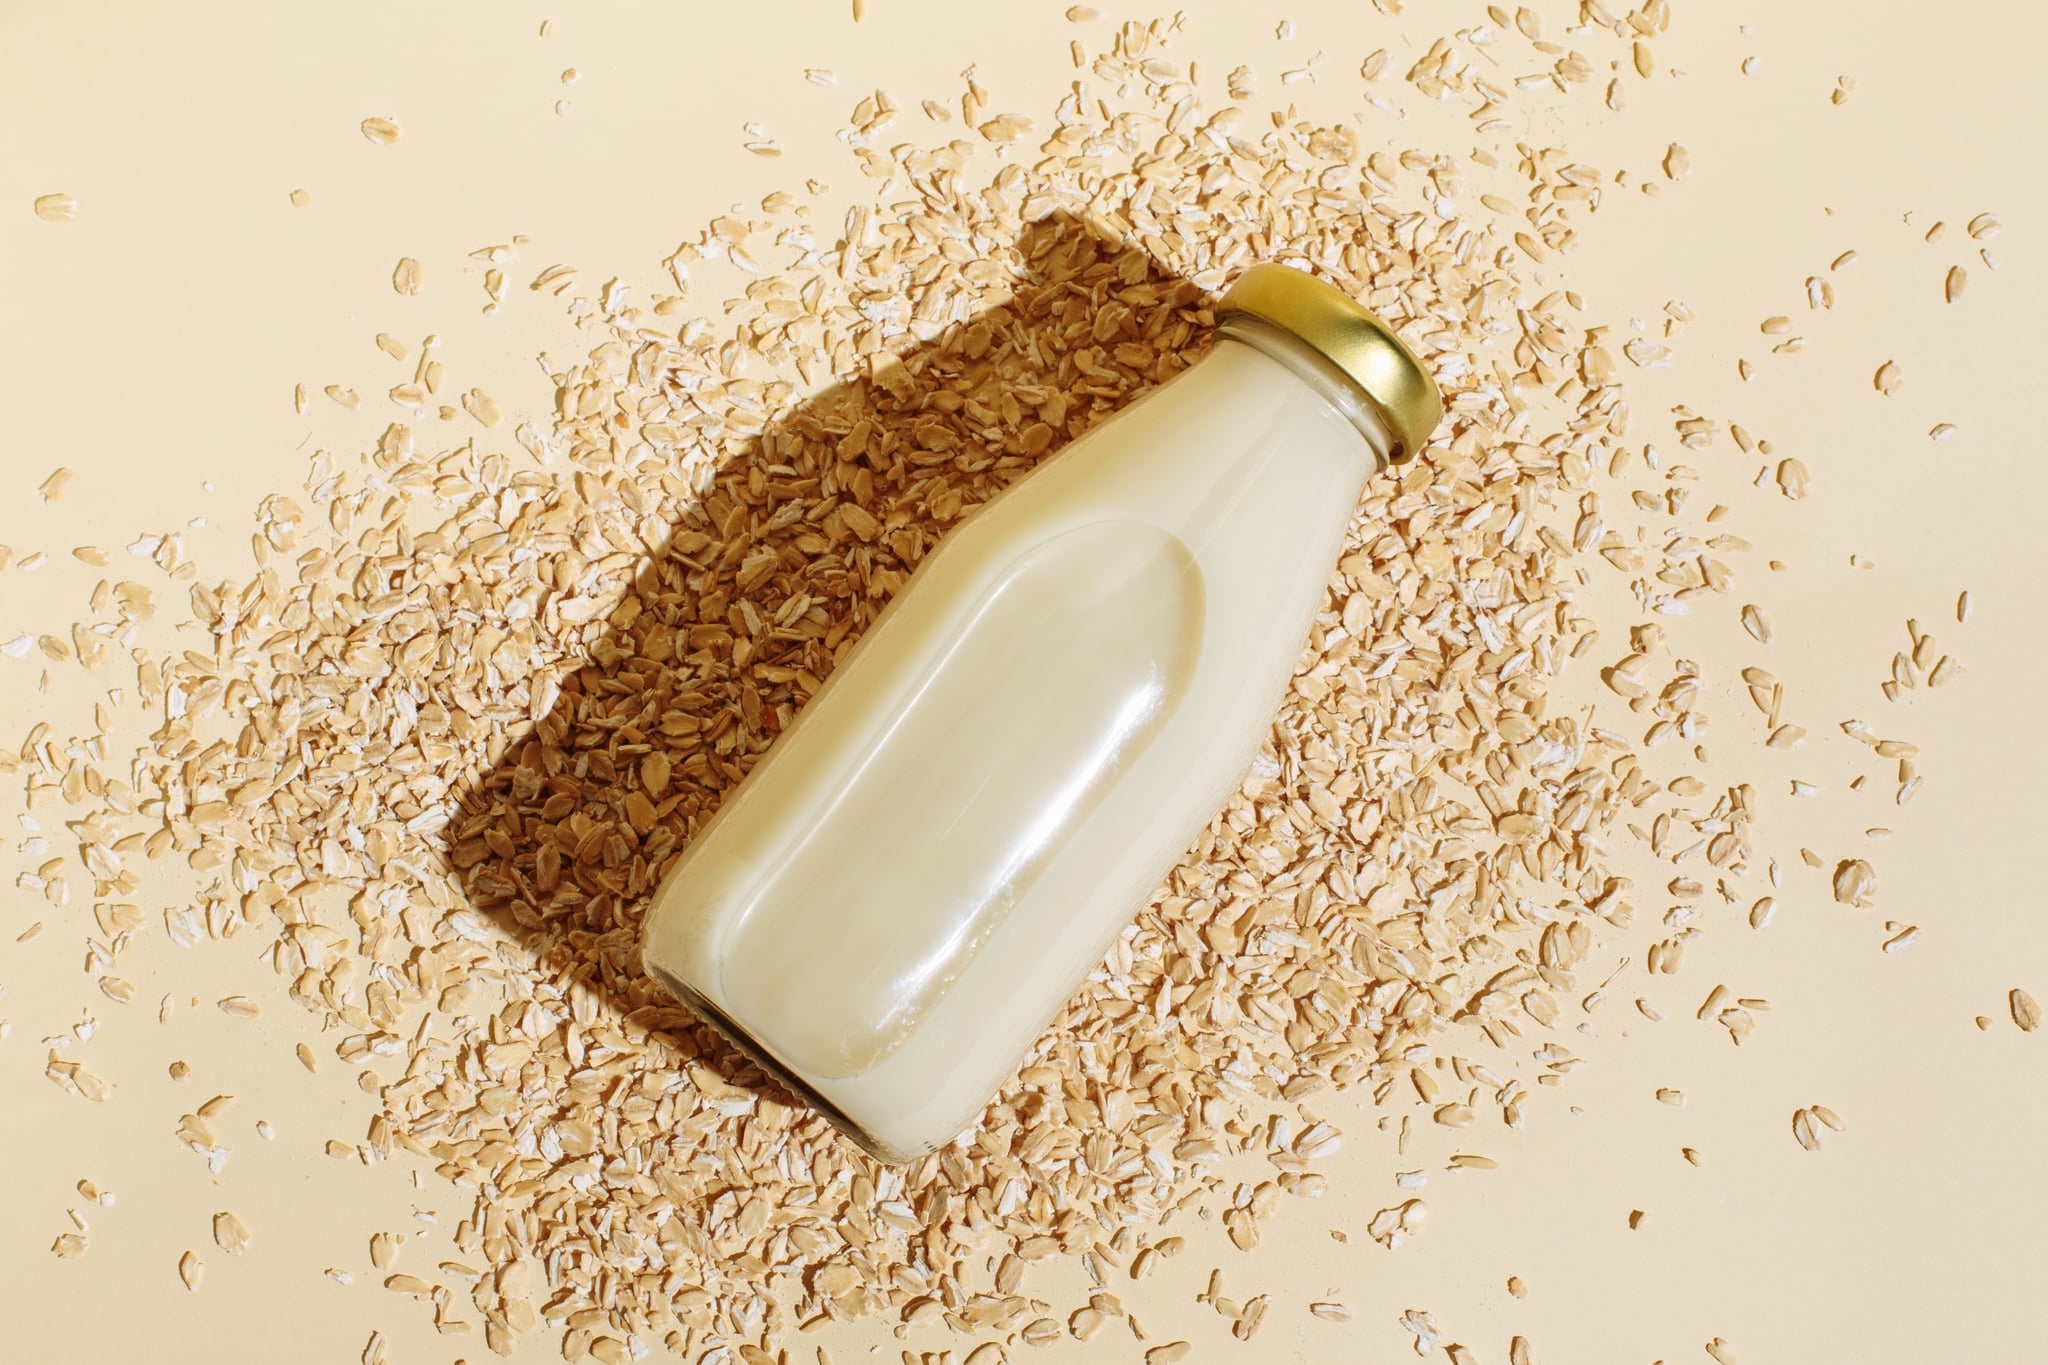 Oat milk in glass bottle and oatmeal flakes on beige background; is oat milk good for you?